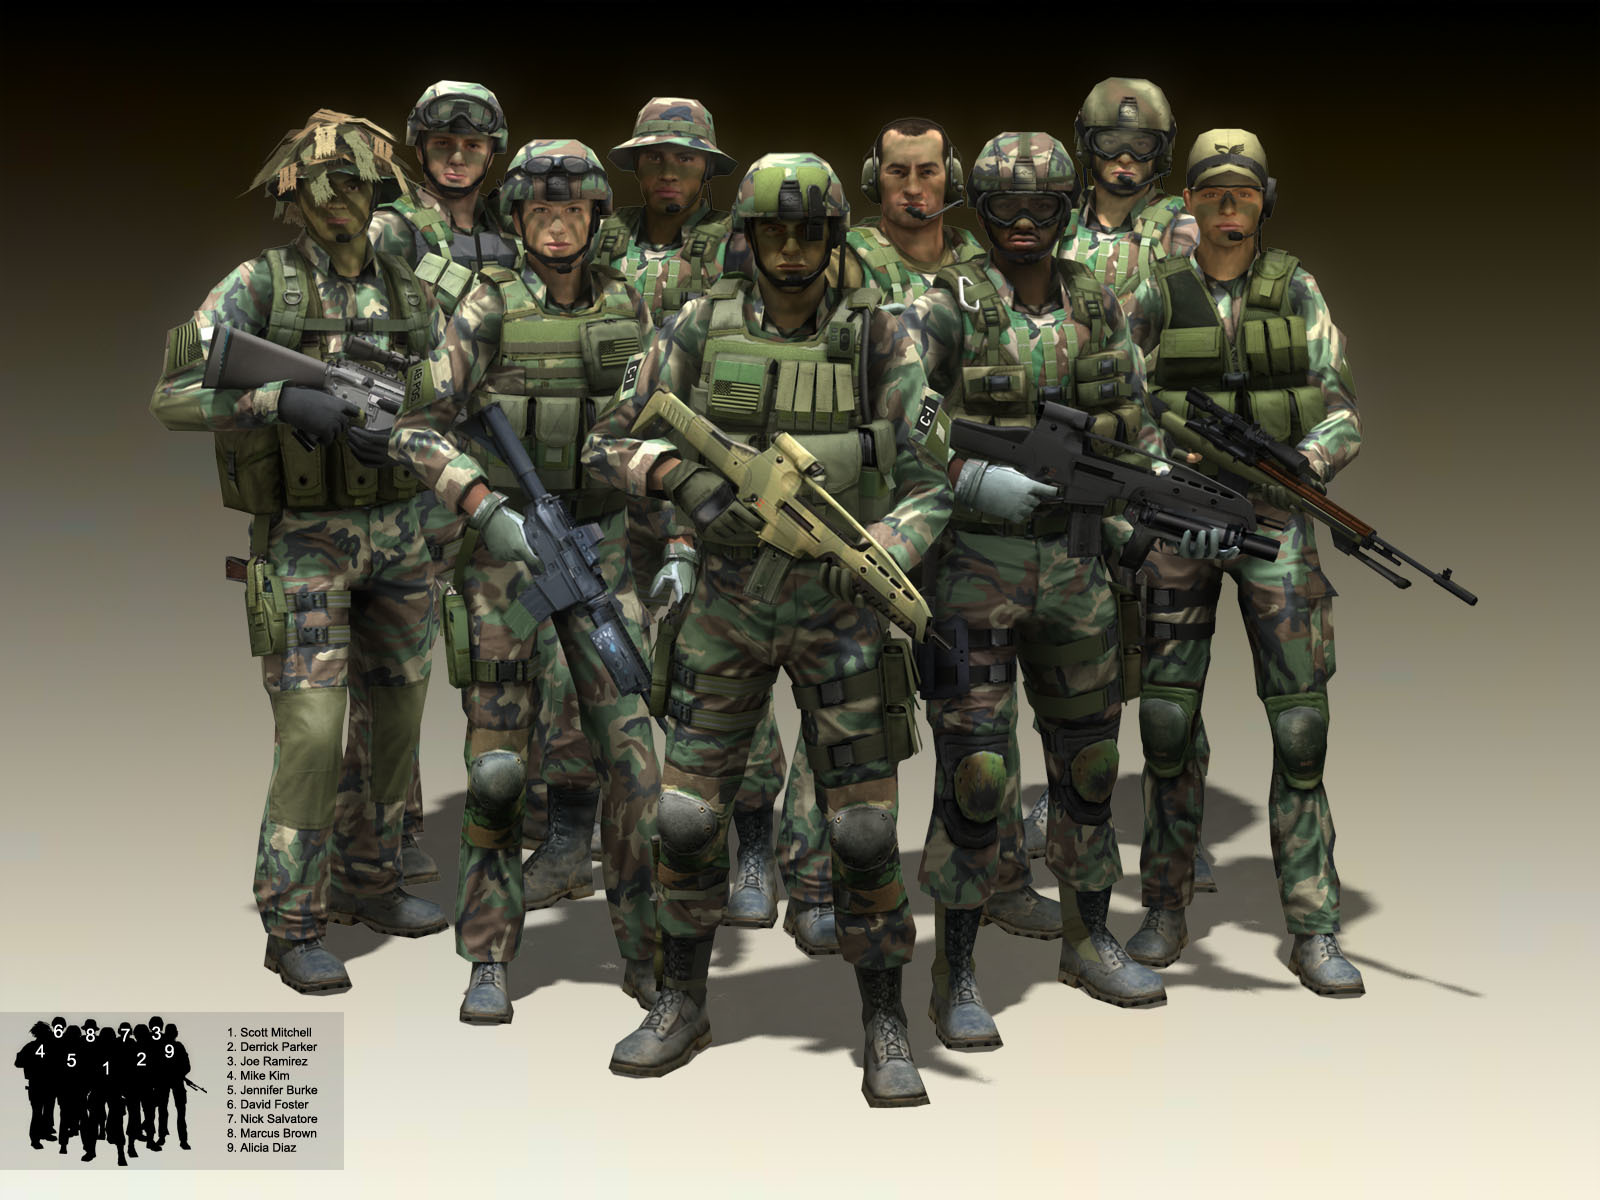 Task Force 141 vs Ghost Recon